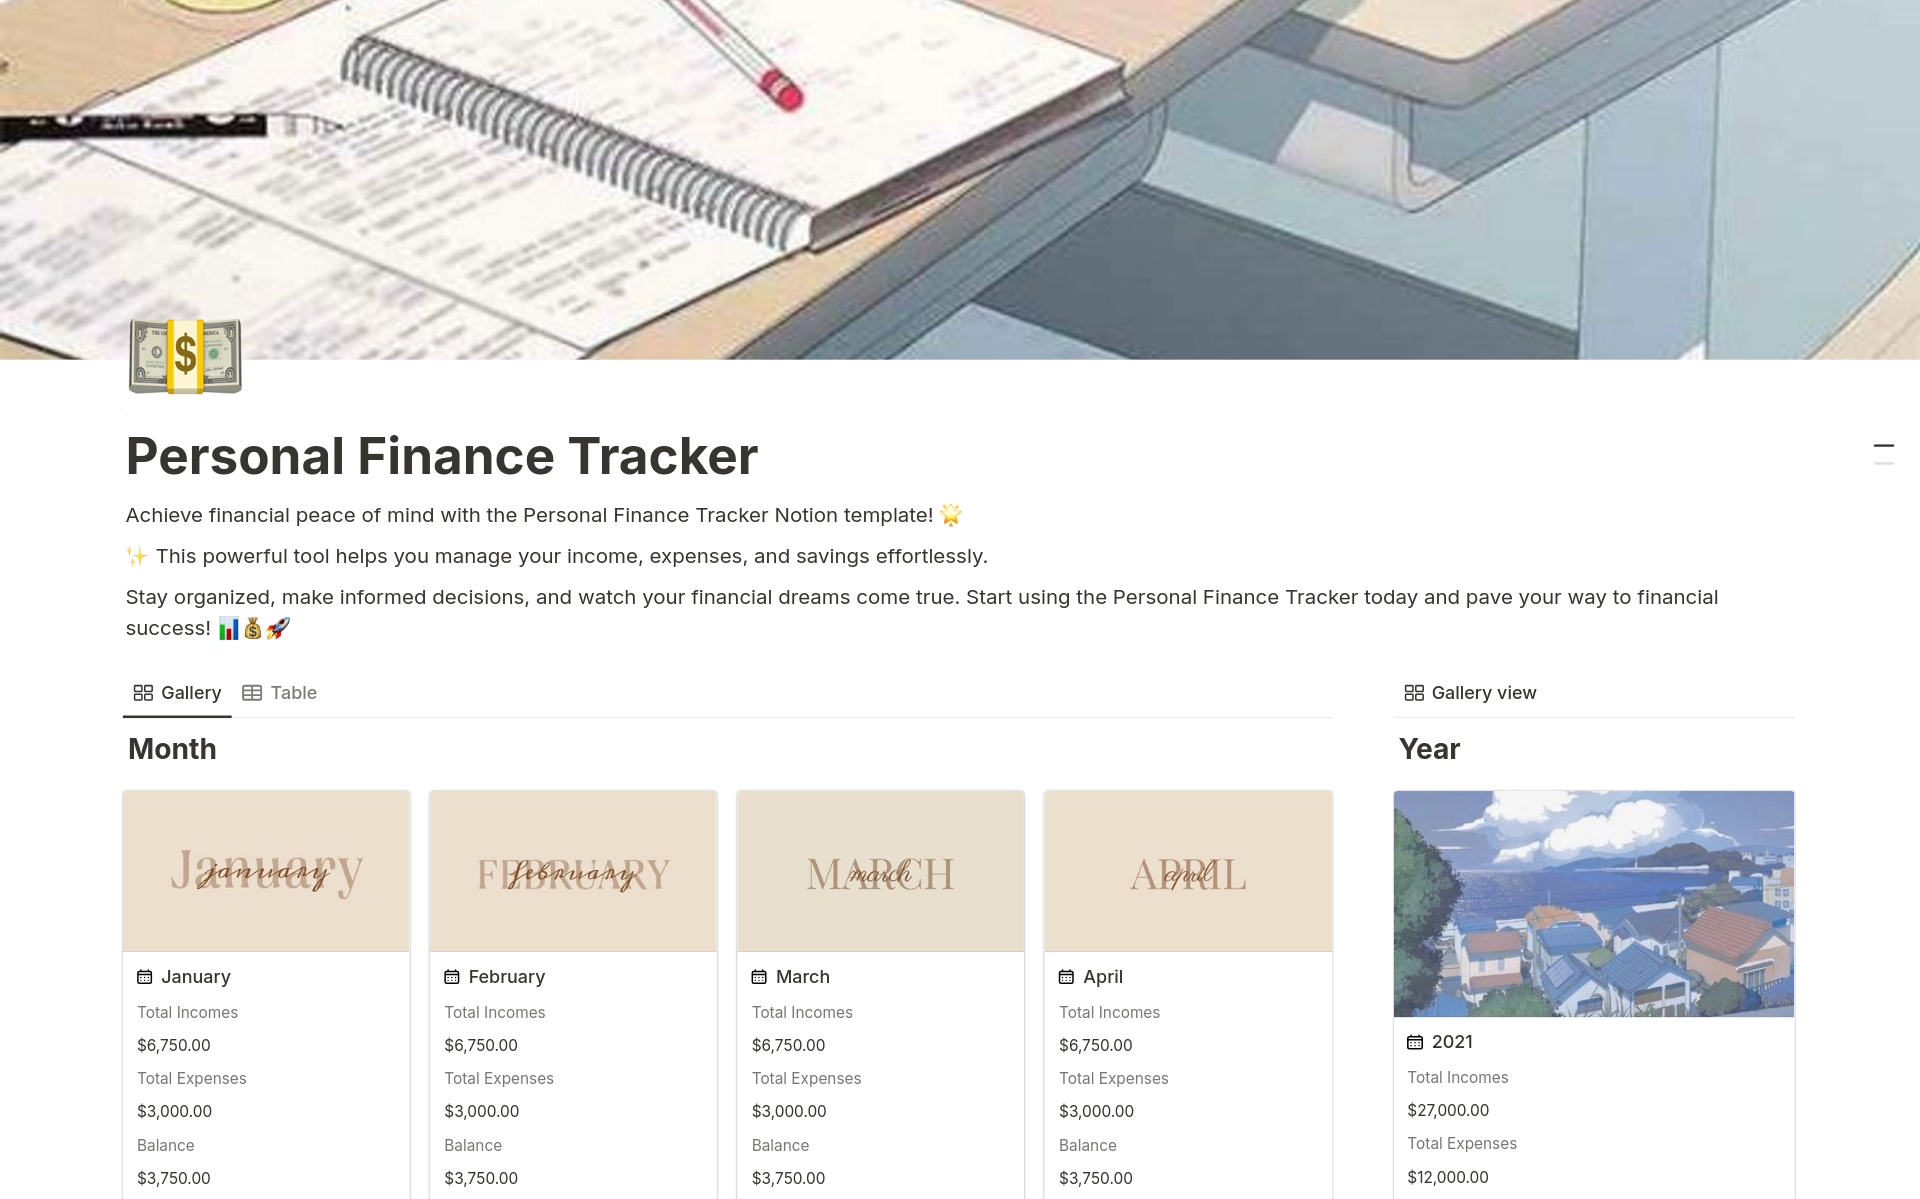 The Personal Finance Tracker Notion template is a comprehensive tool for managing your finances. It includes features for tracking income from various sources like salaries, freelance work, and investments. It also helps manage expenses ranging from essential needs to discretiona